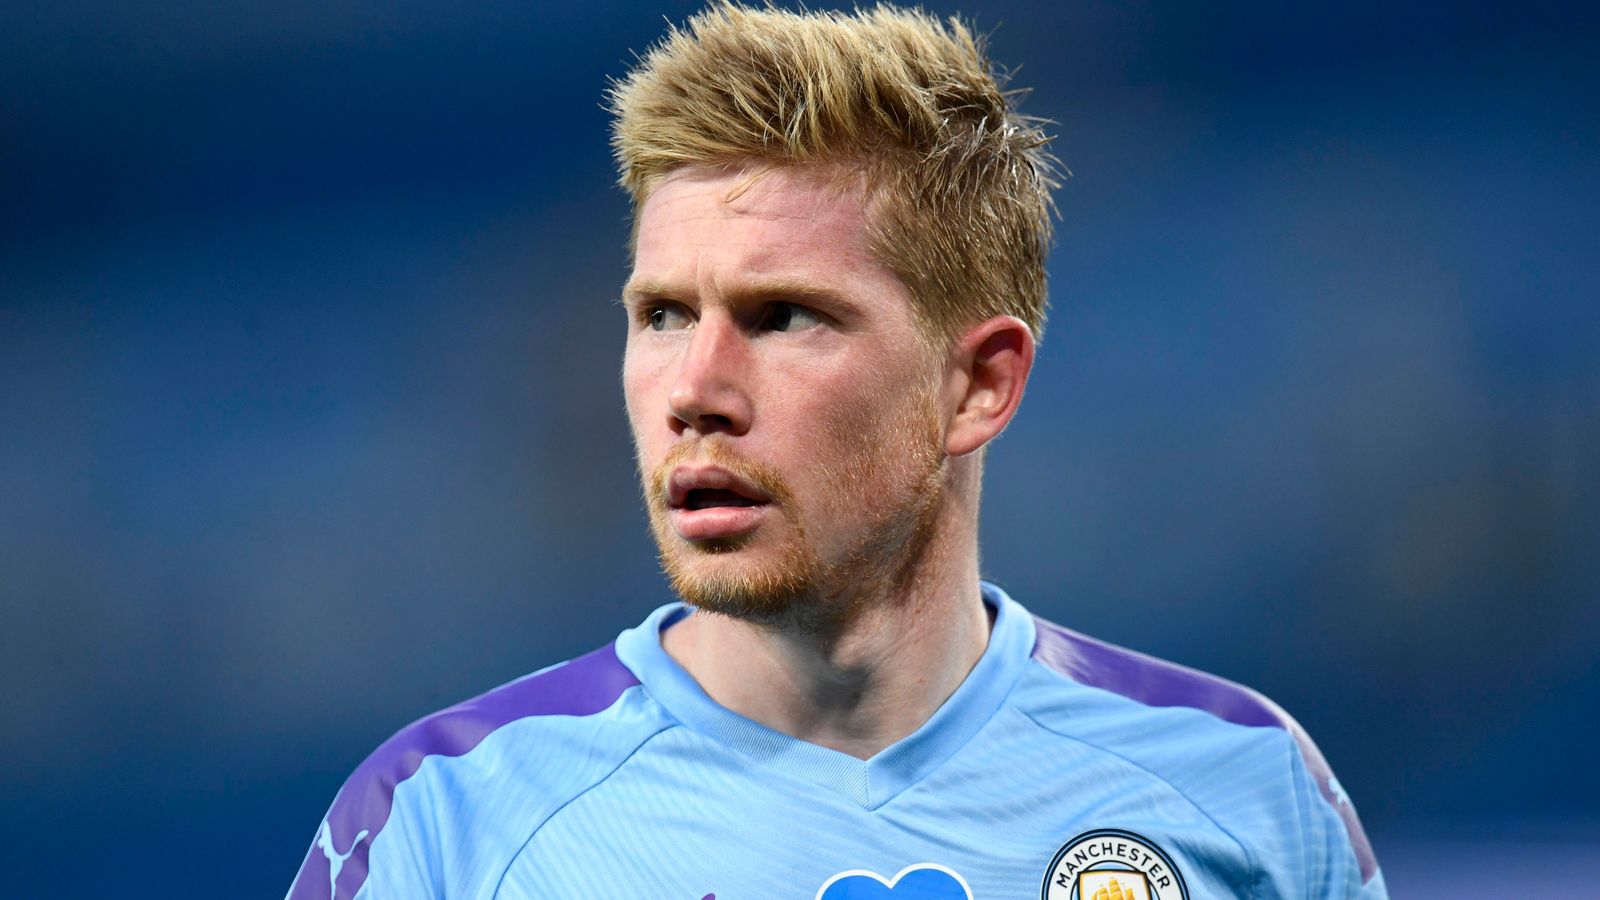  Kevin De Bruyne of Manchester City looking upfield to provide an assist during a soccer match.